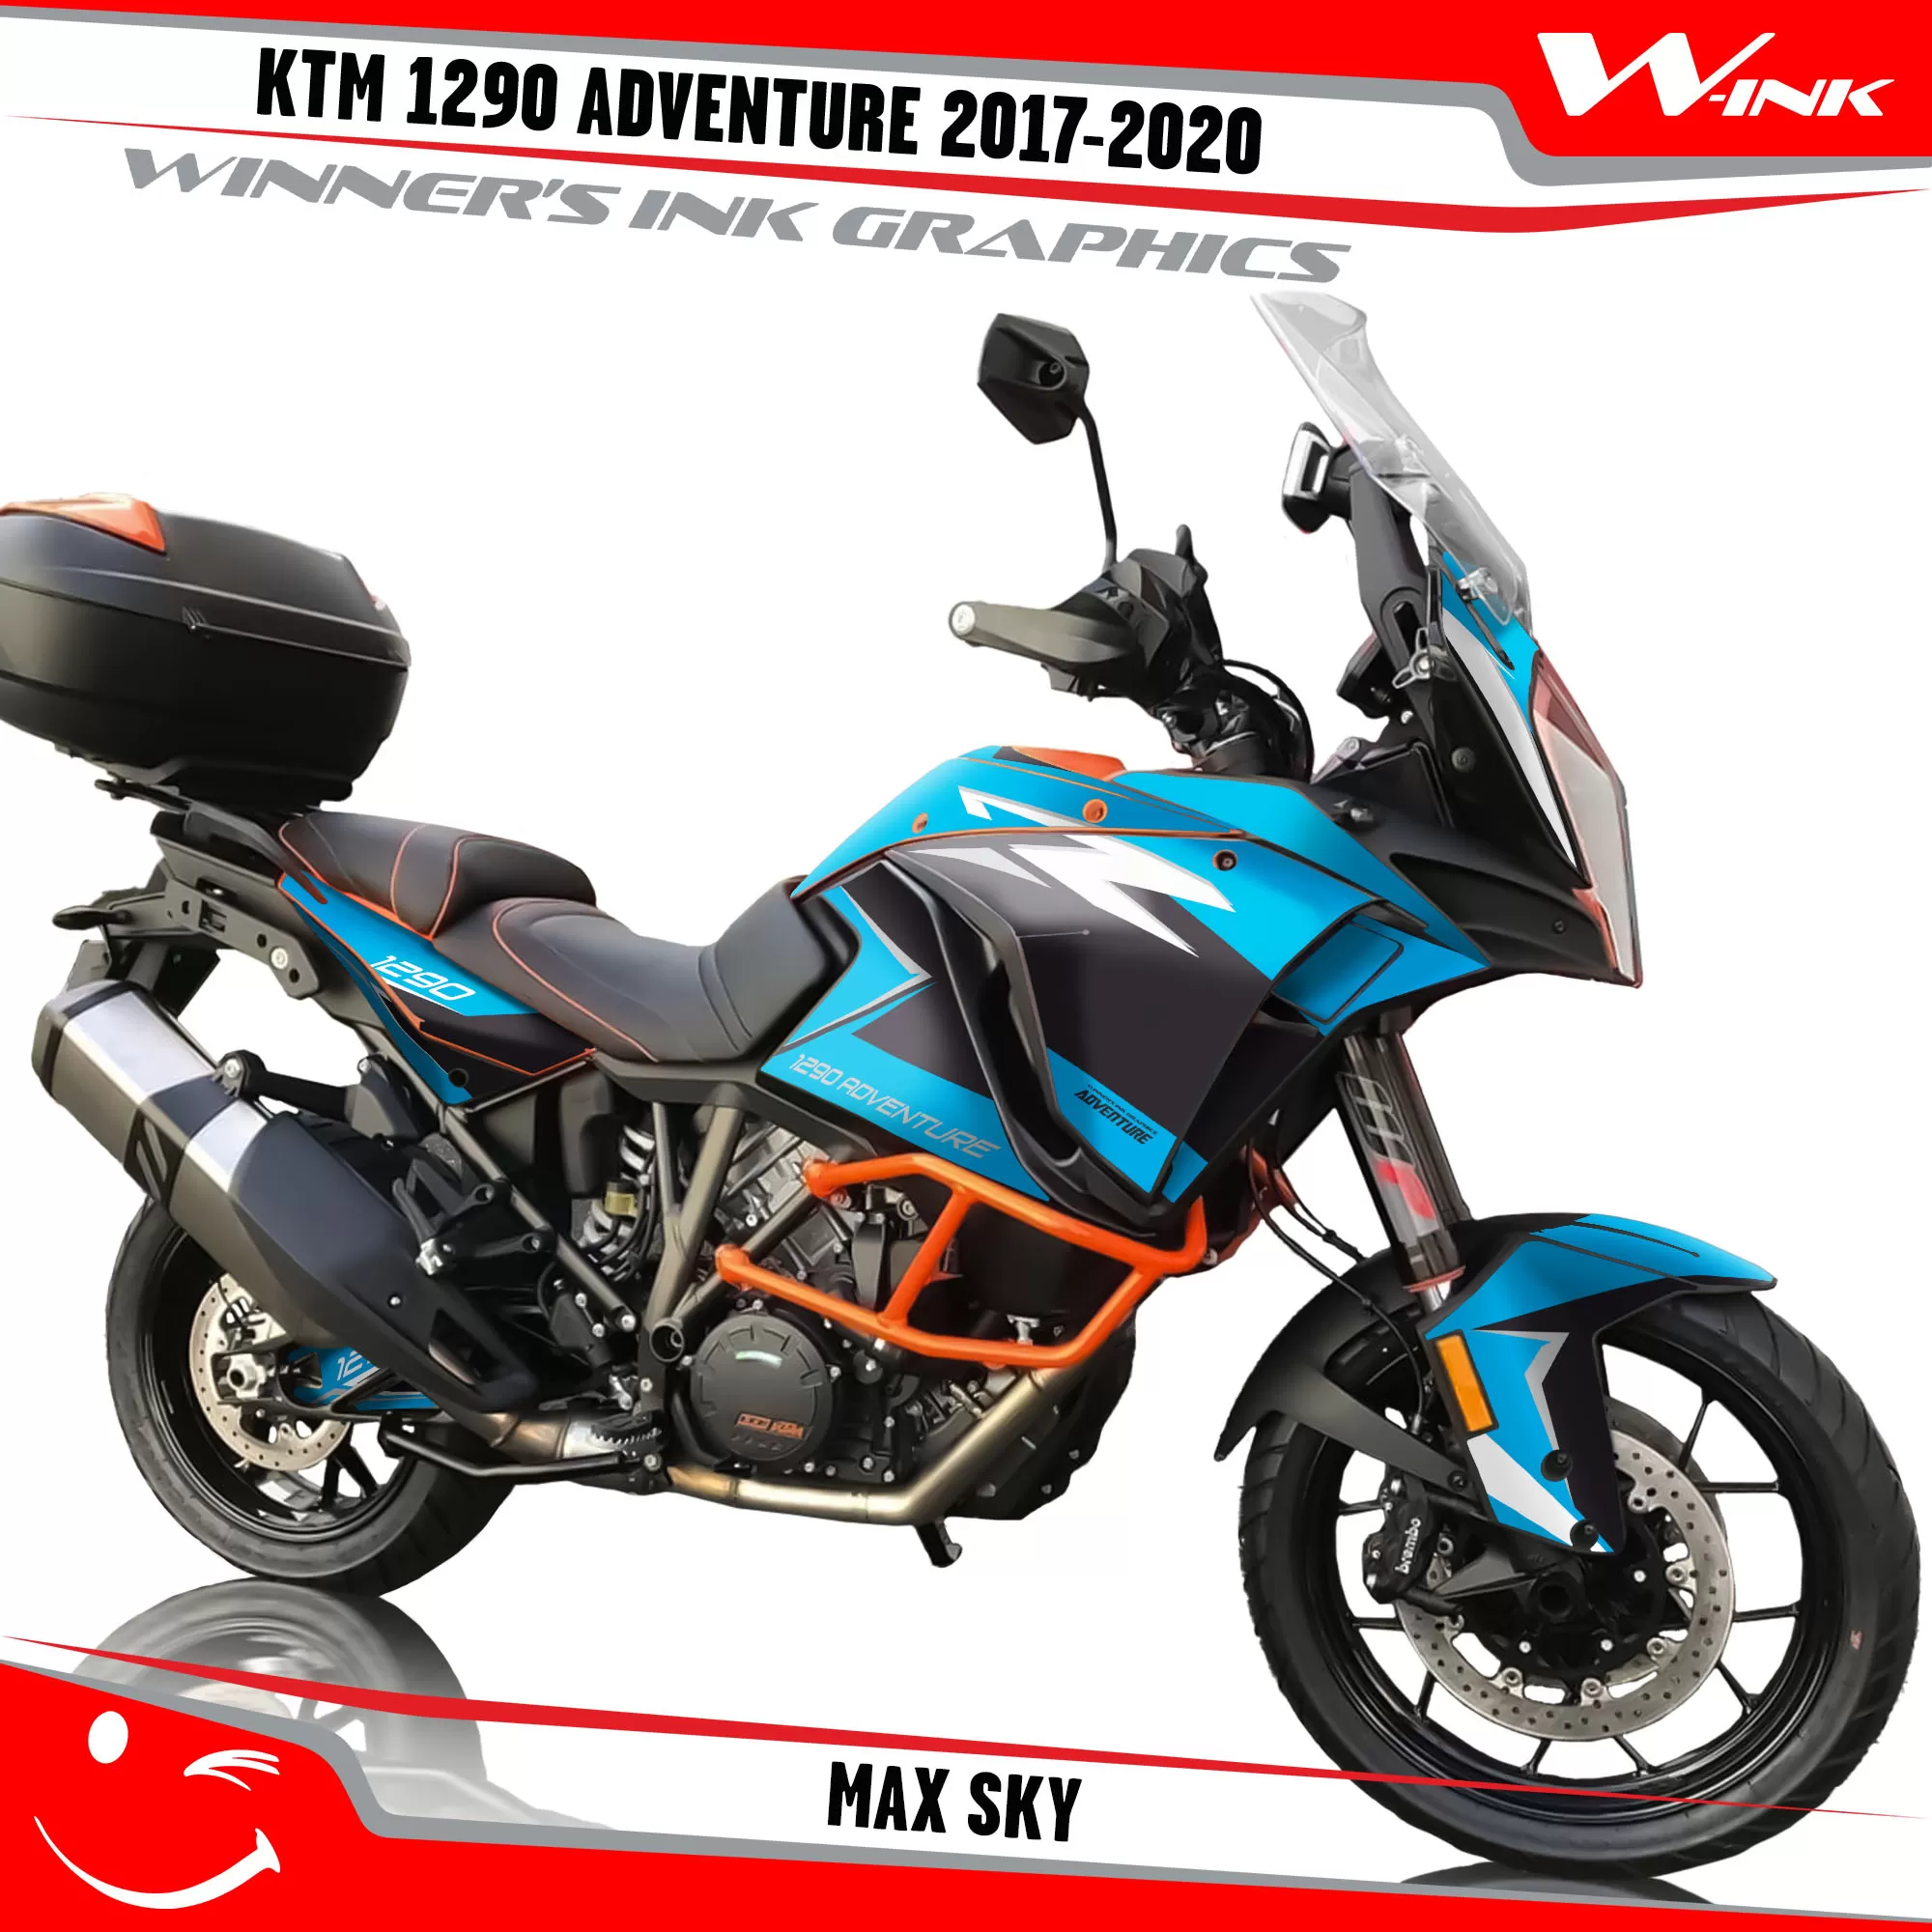 KTM-Adventure-1290-2017-2018-2019-2020-graphics-kit-and-decals-Max-Sky